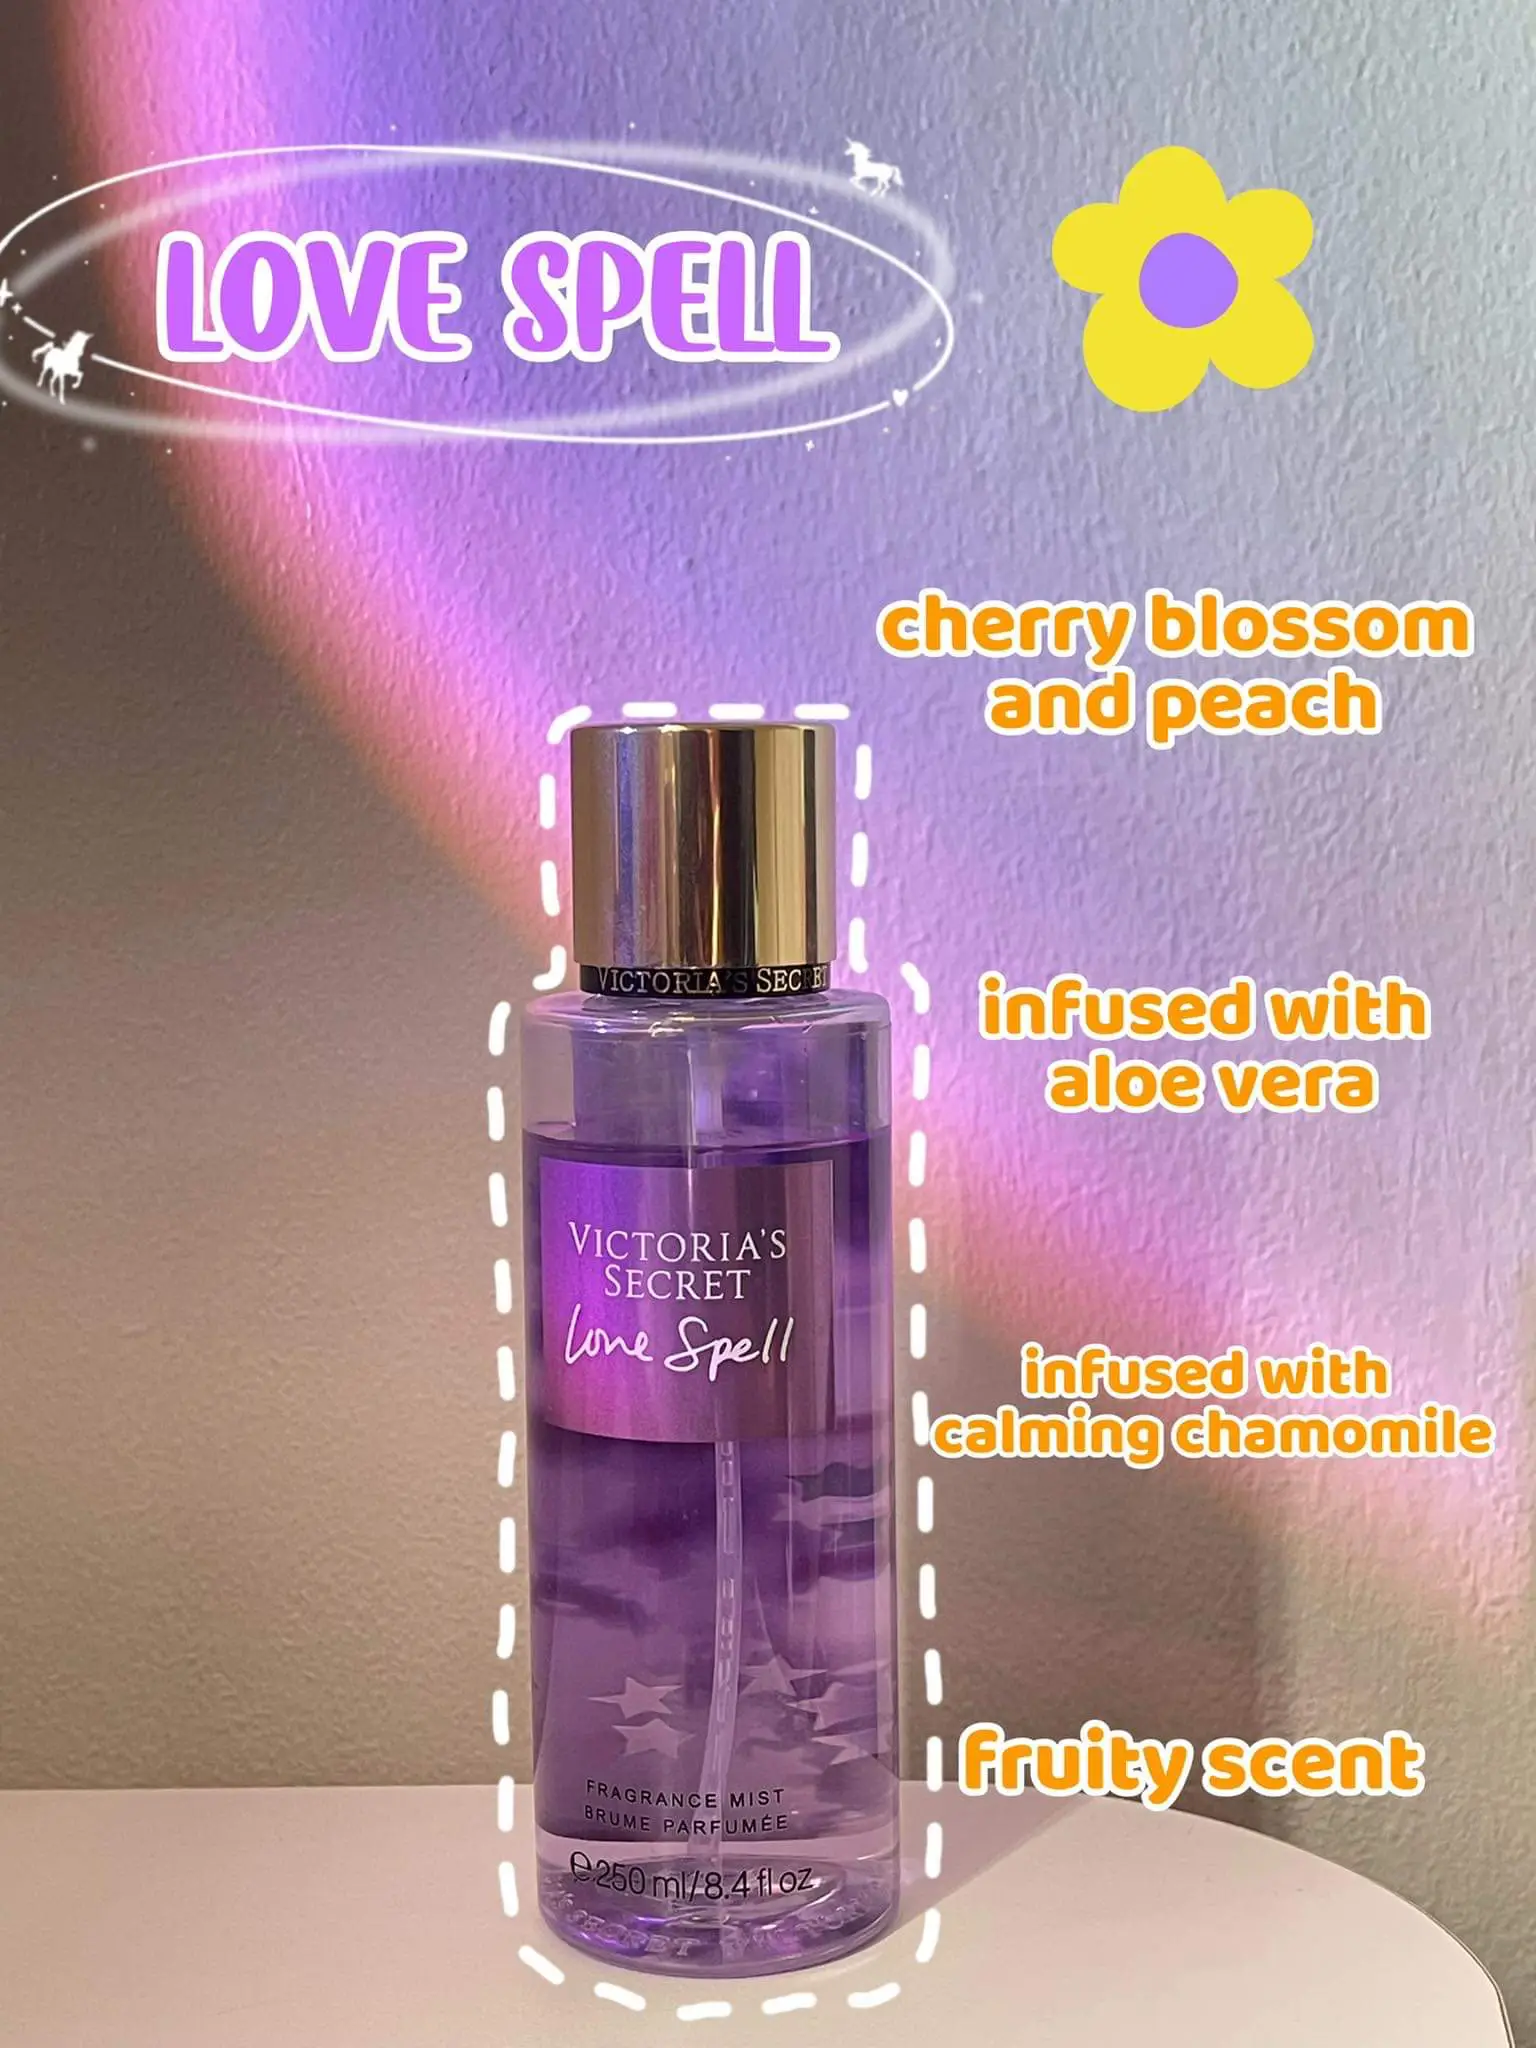 Spell on You - Perfumes - Collections